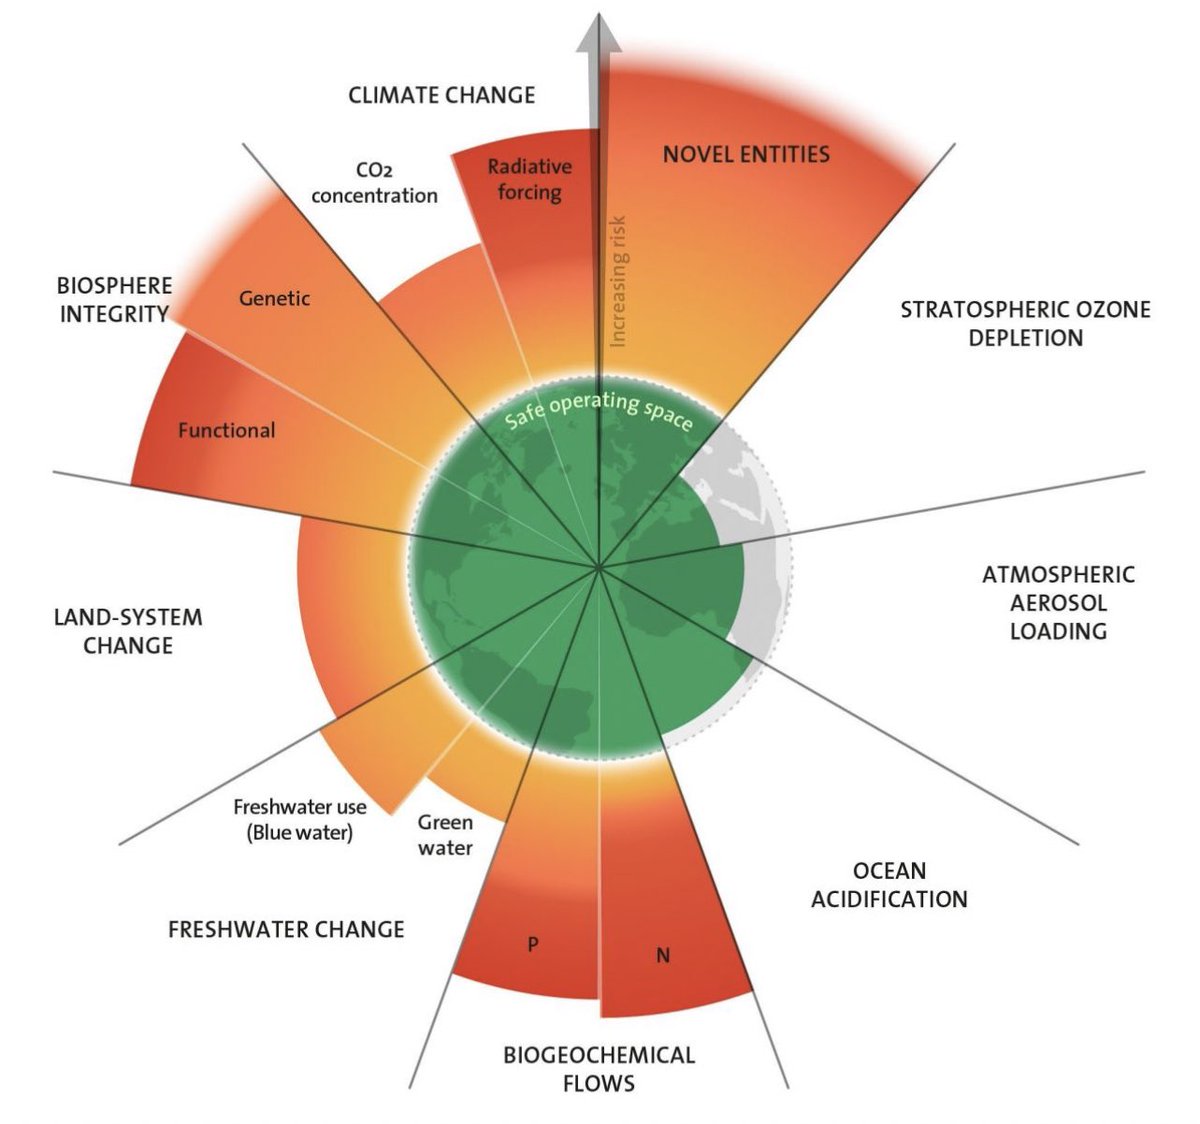 MAJOR UPDATE: All planetary boundaries are assessed, and six are crossed. For the first time ever, scientists have quantified all nine planetary boundaries. Six of them are already transgressed and we are increasing pressure on the others.